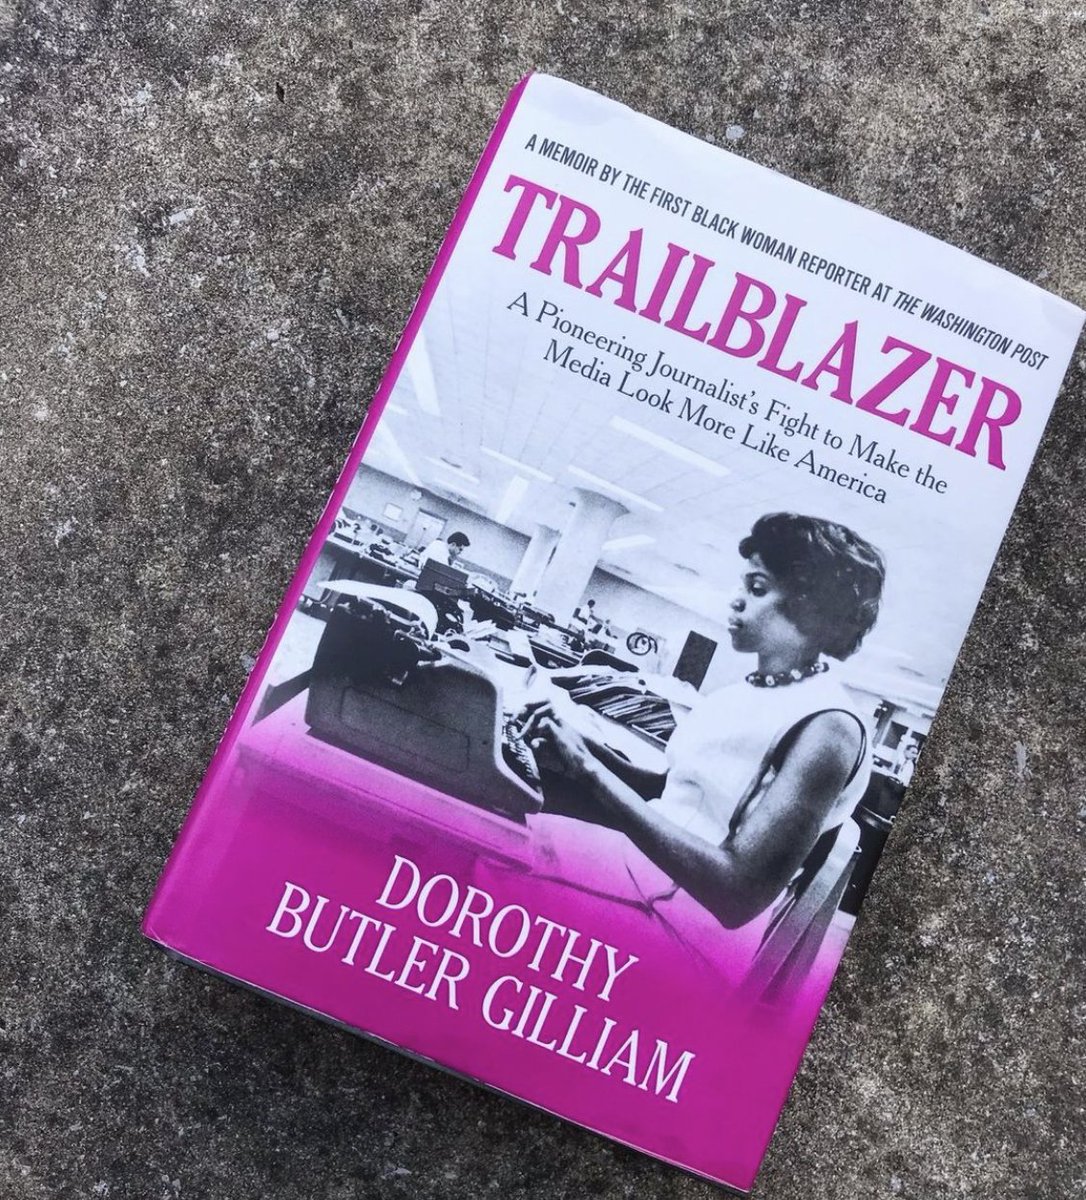 I've been in the journalism for 50 years, and let me tell you, it's been quite the ride. From behind-the-scenes civil rights wins to breaking barriers as a 'Black first,' my story will help you conquer your career journey. #TrailblazerbyDBG